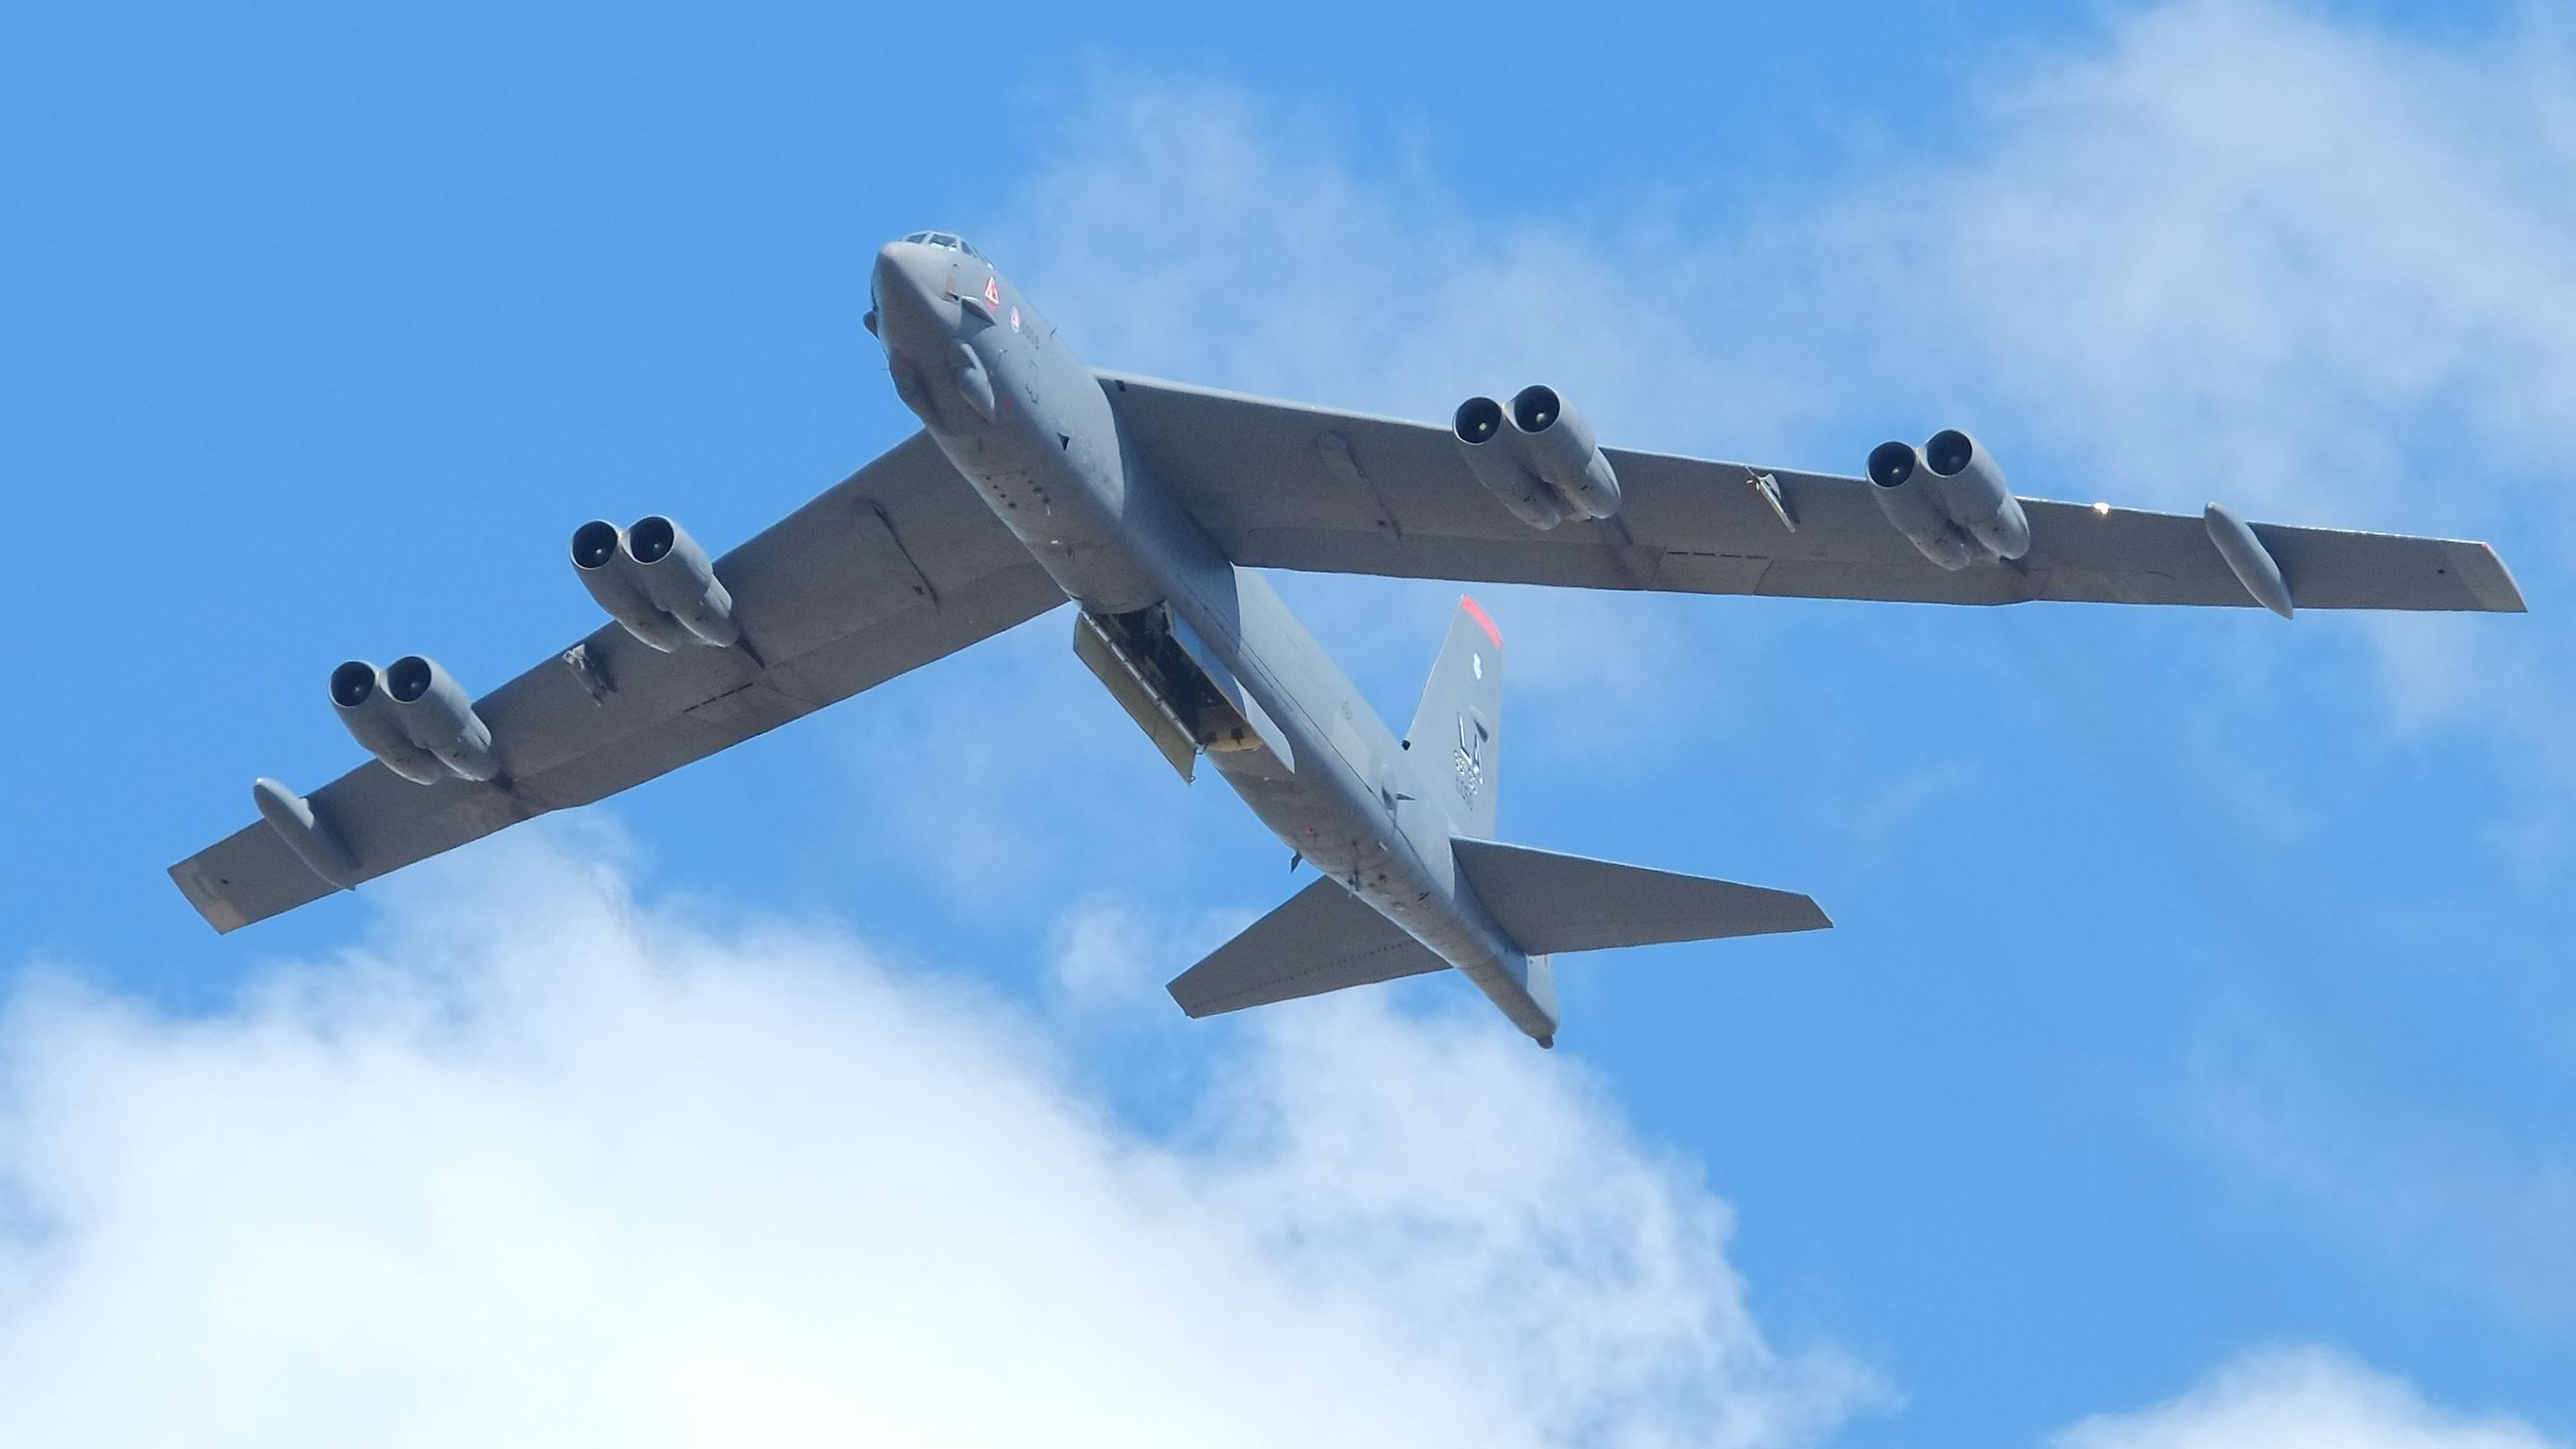 A USAF Boeing B-52 Stratofortress flying overhead with an open bomb bay door.